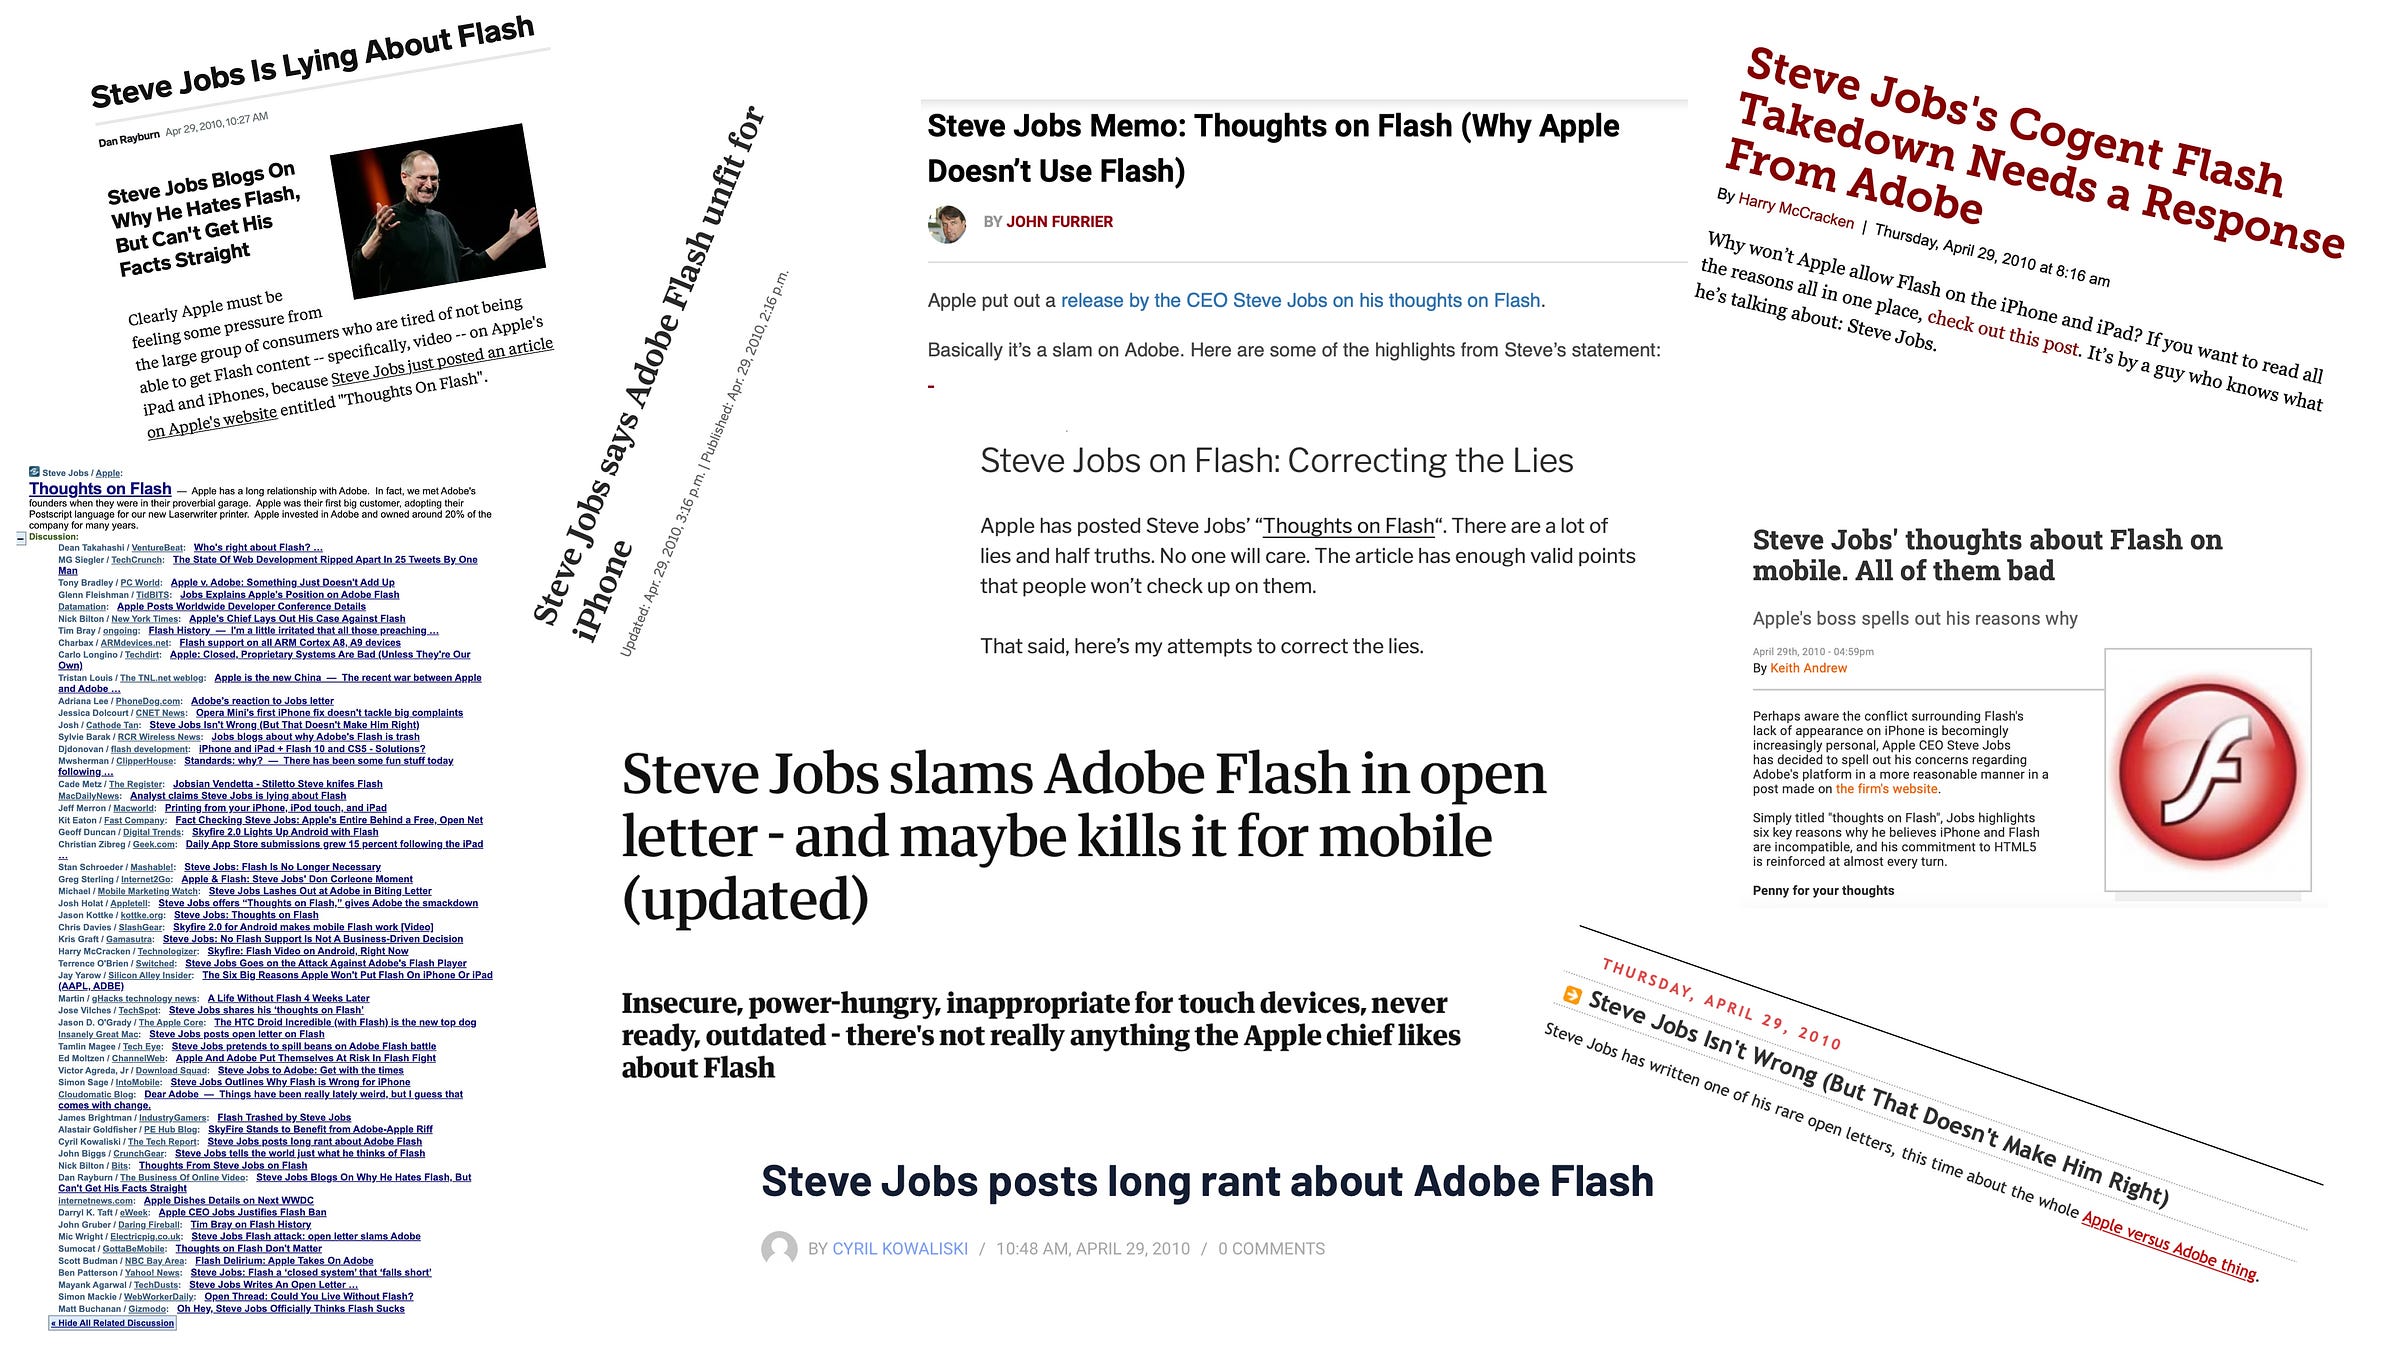 About a dozen different headlines on the hysteria around Apple's post on "Thoughts on Flash".